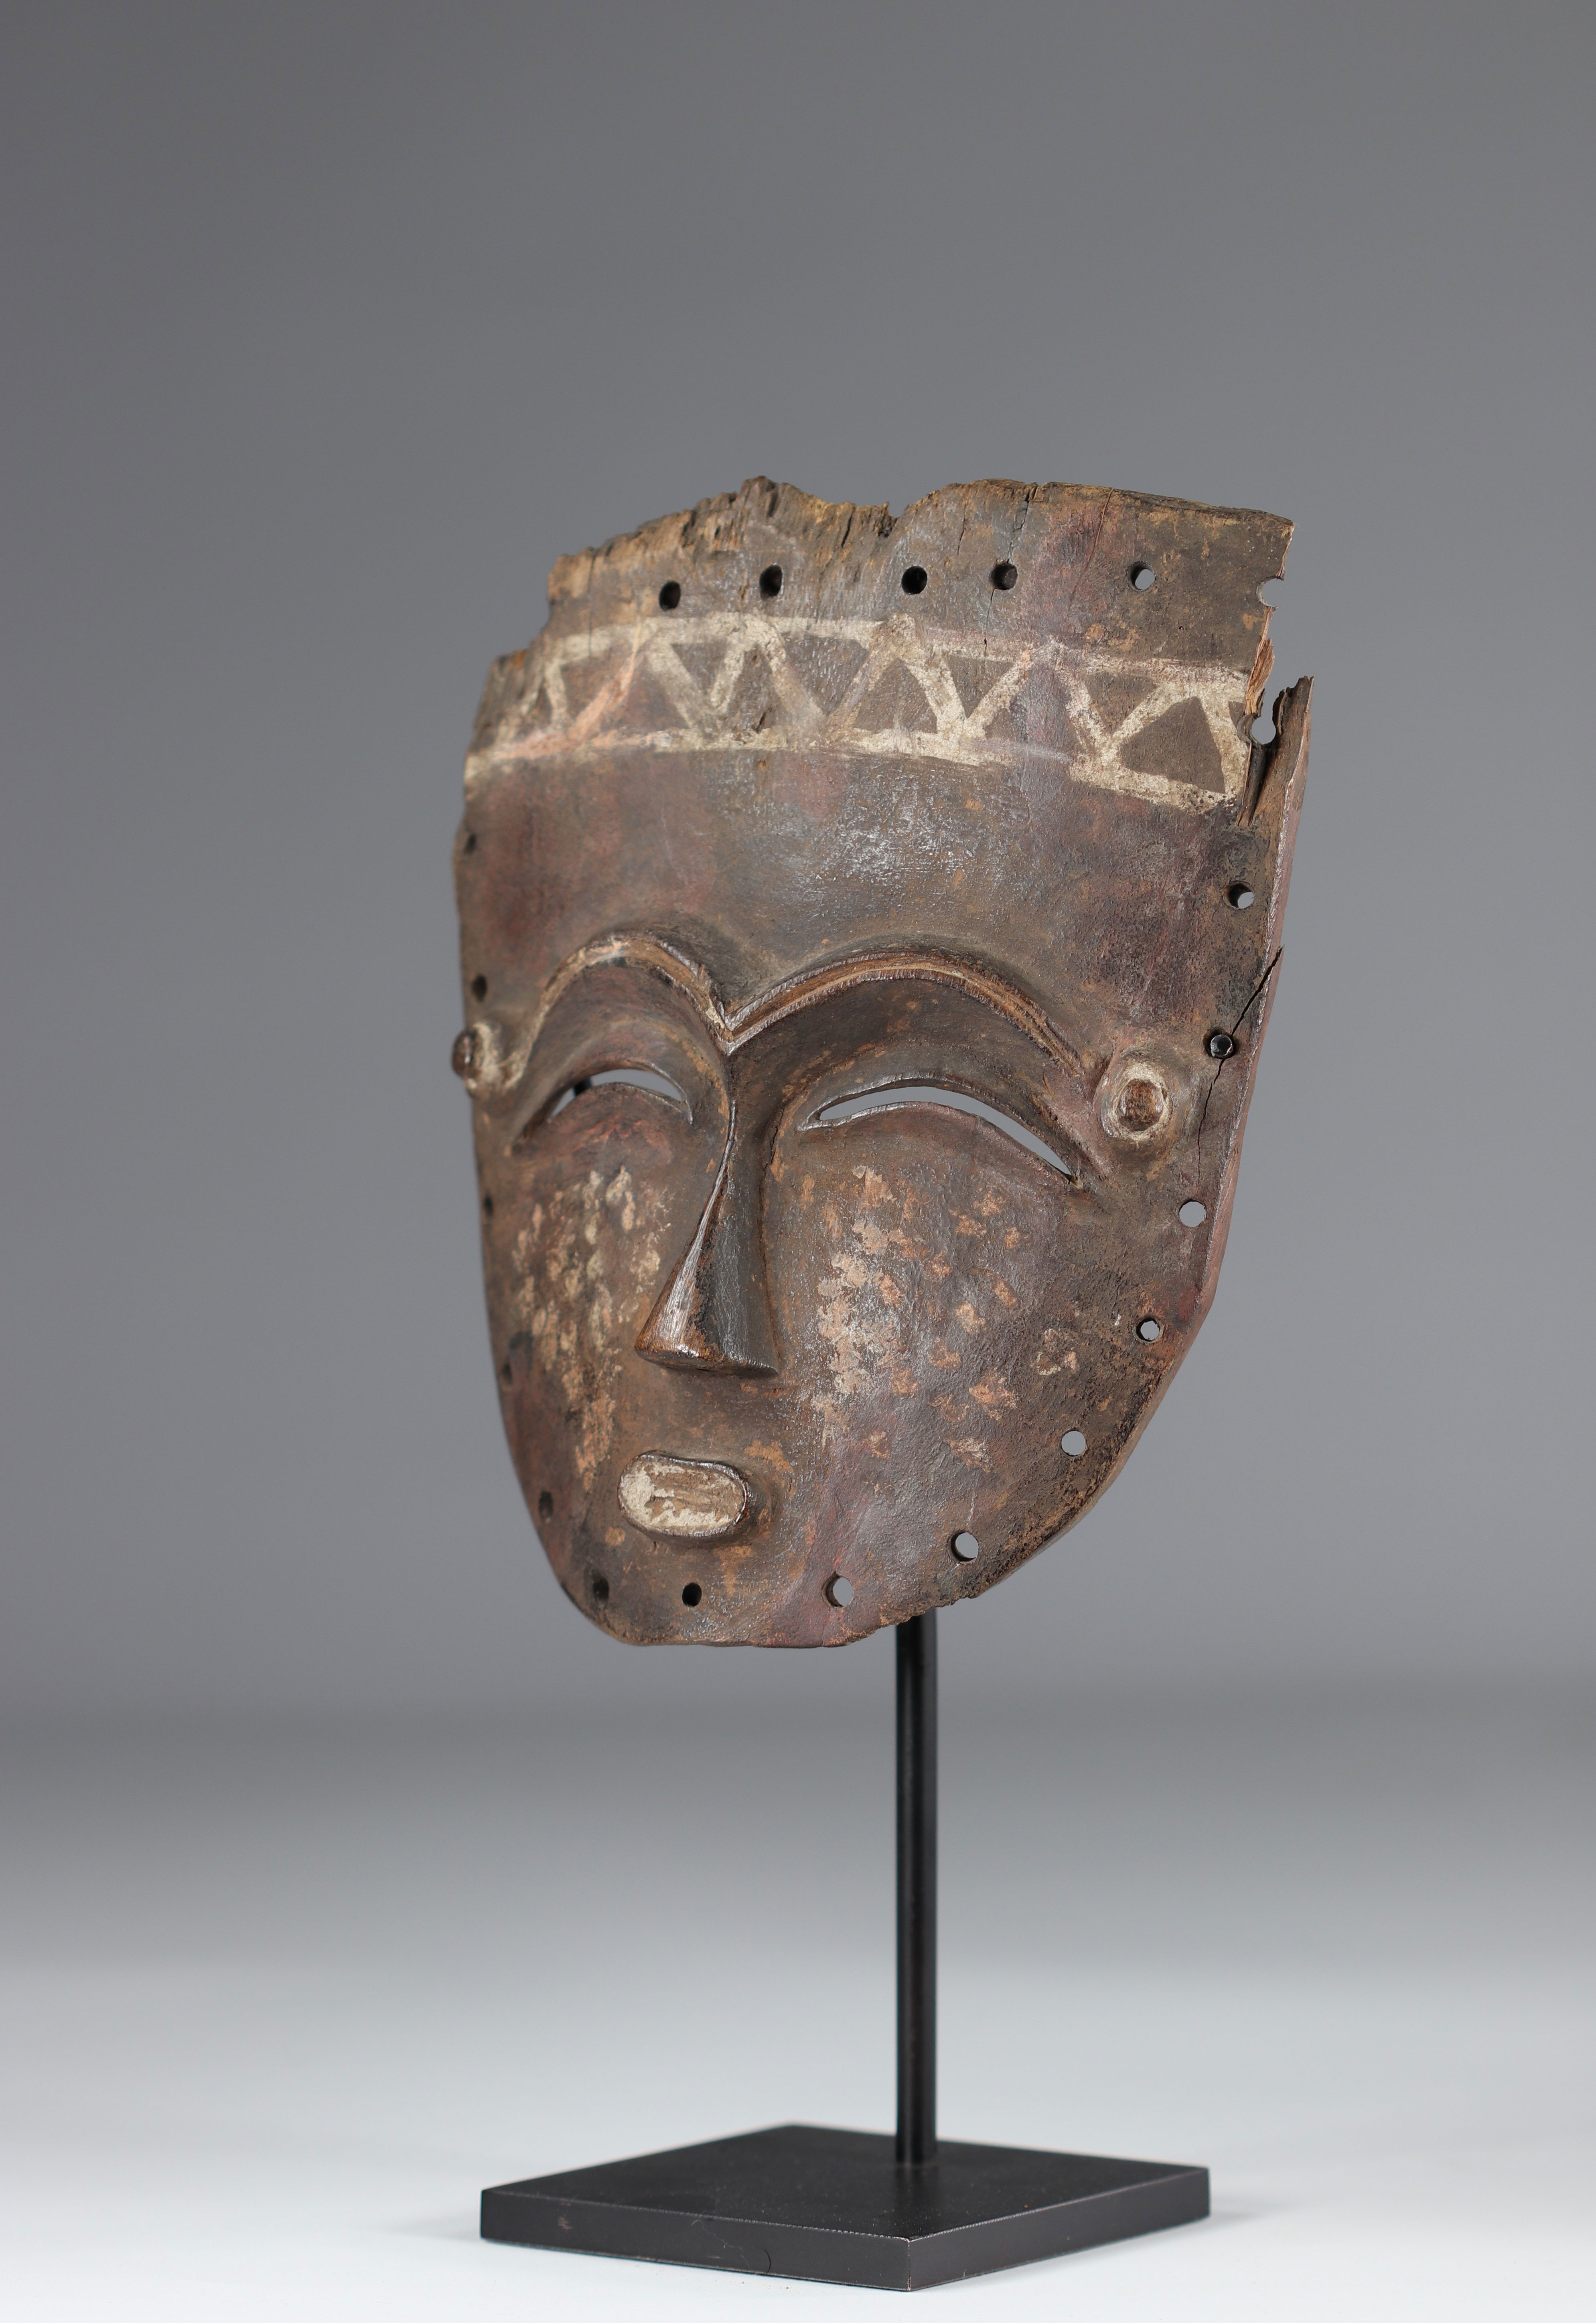 Rare and very old Lele mask - DRC, traces of use, natural pigments from the early 20th century - Image 3 of 5